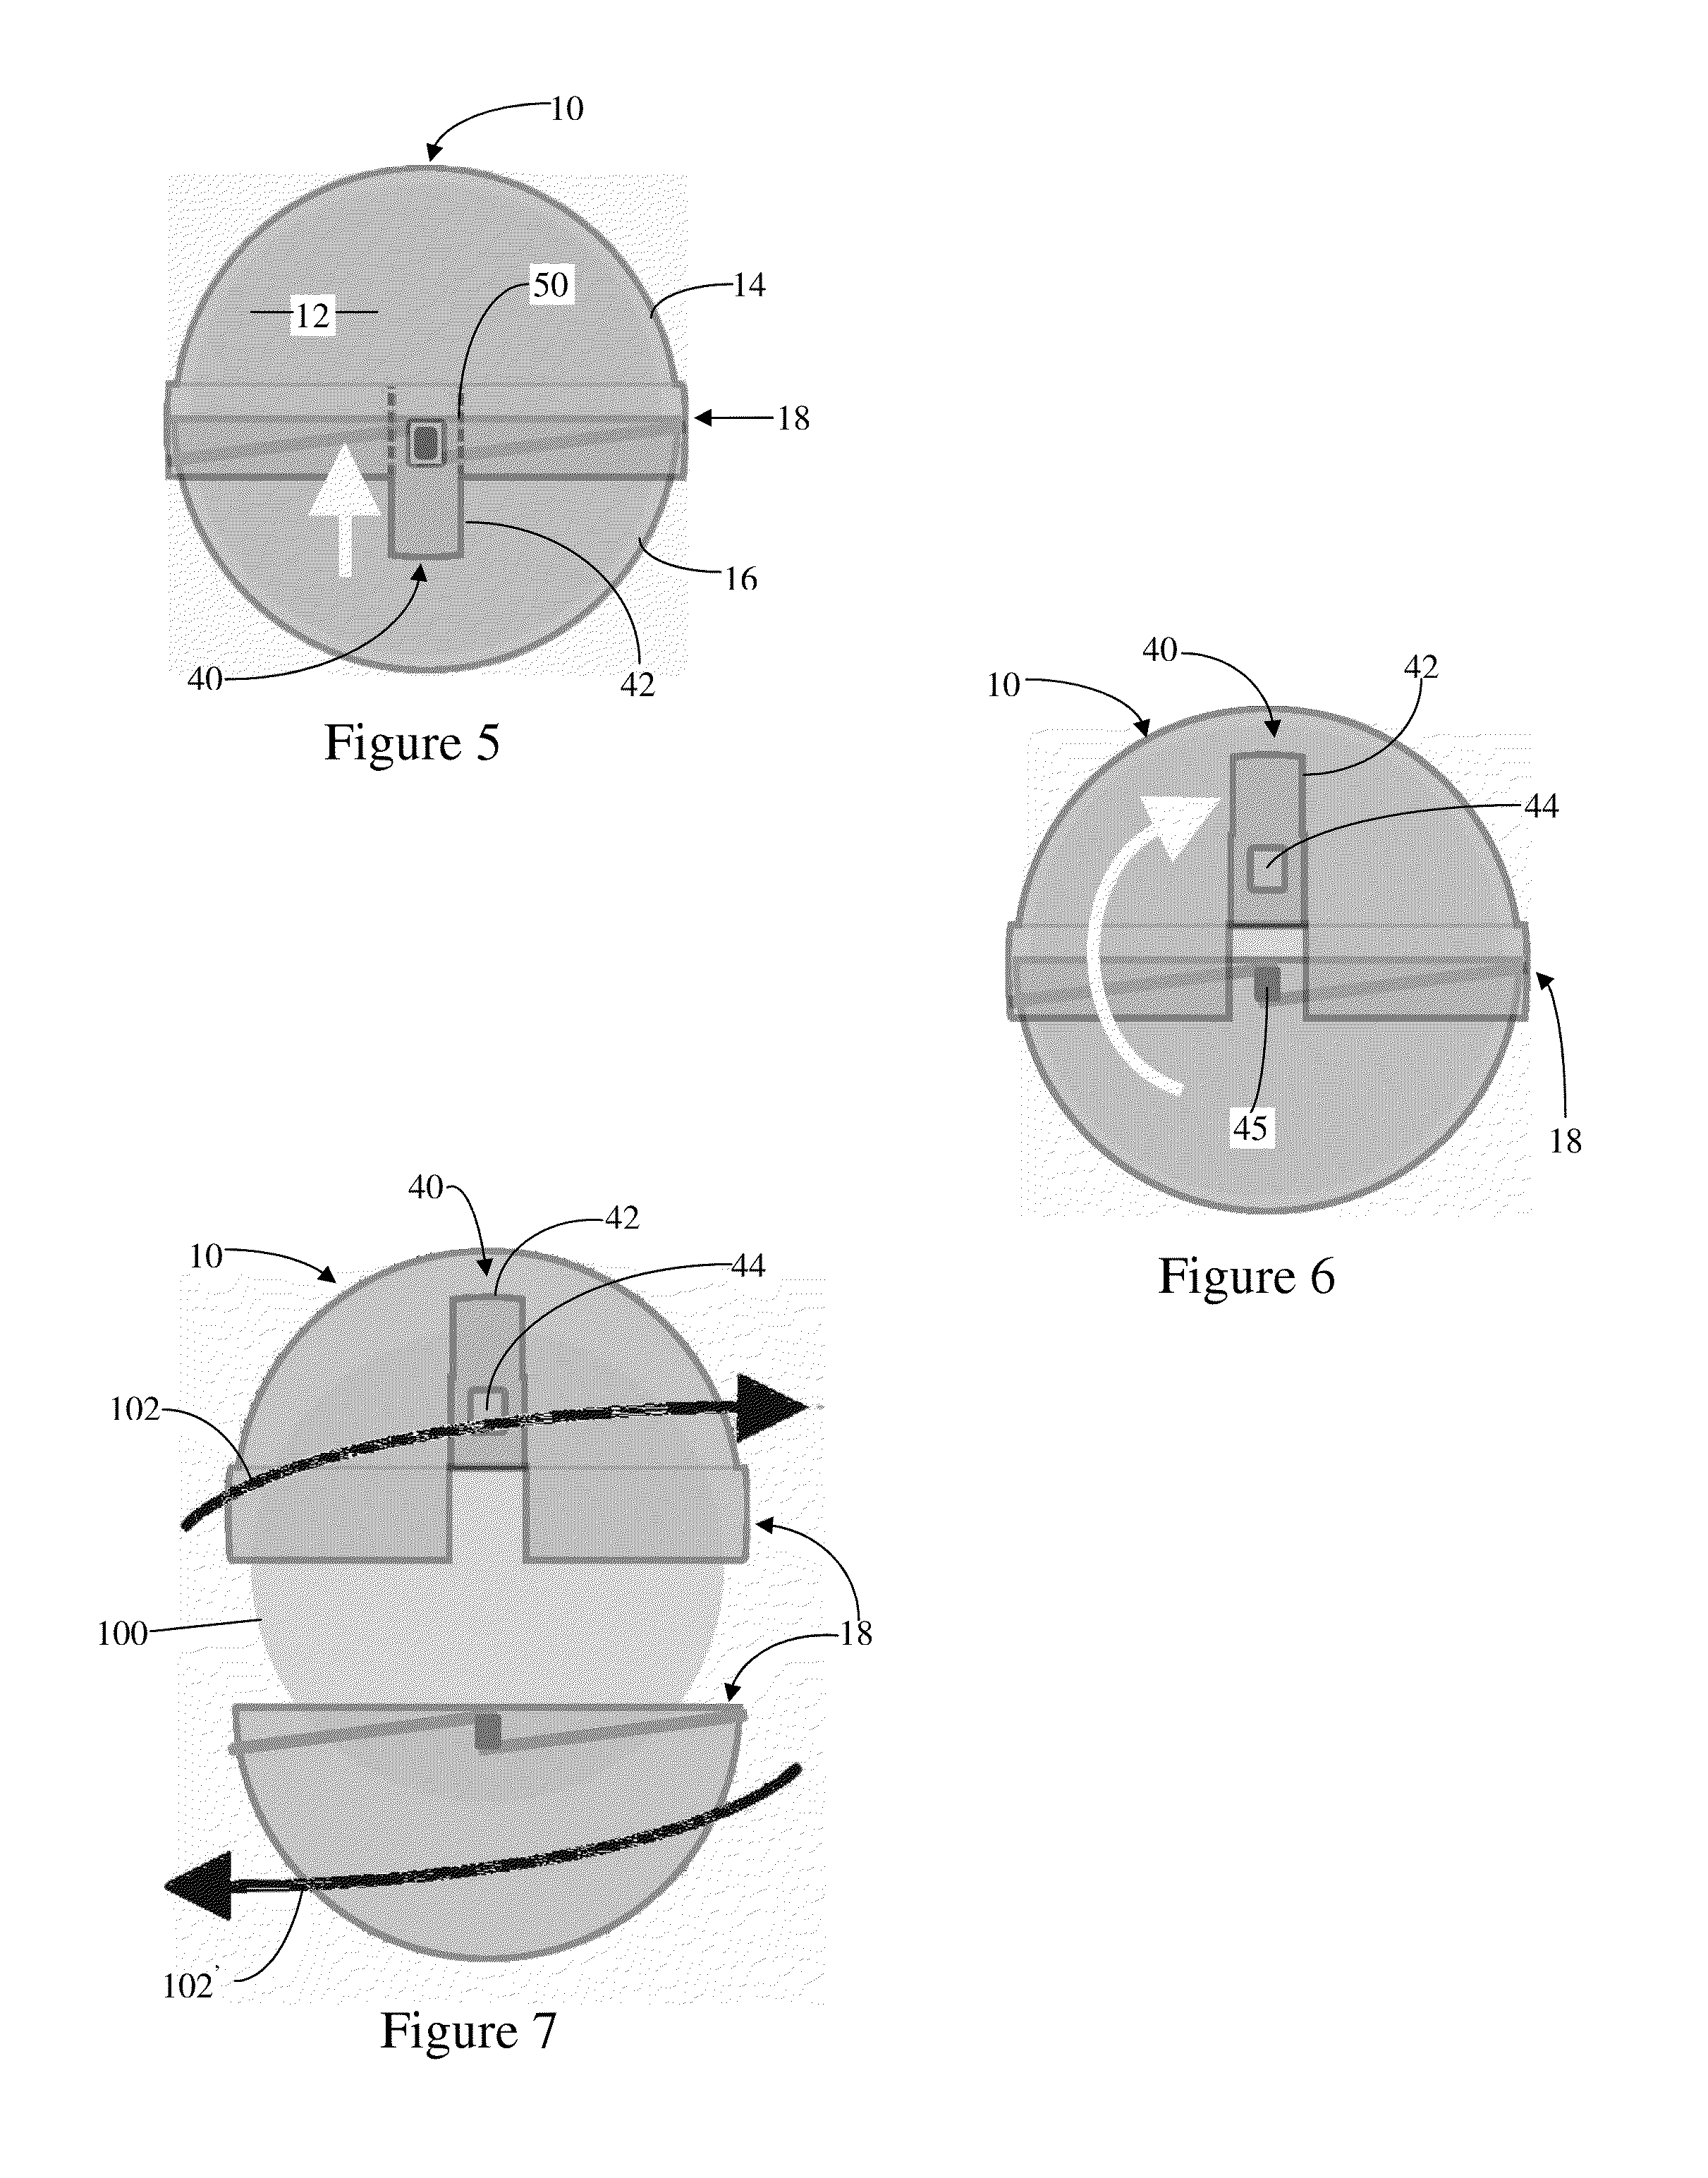 Apparatus for forming a frozen liquid product